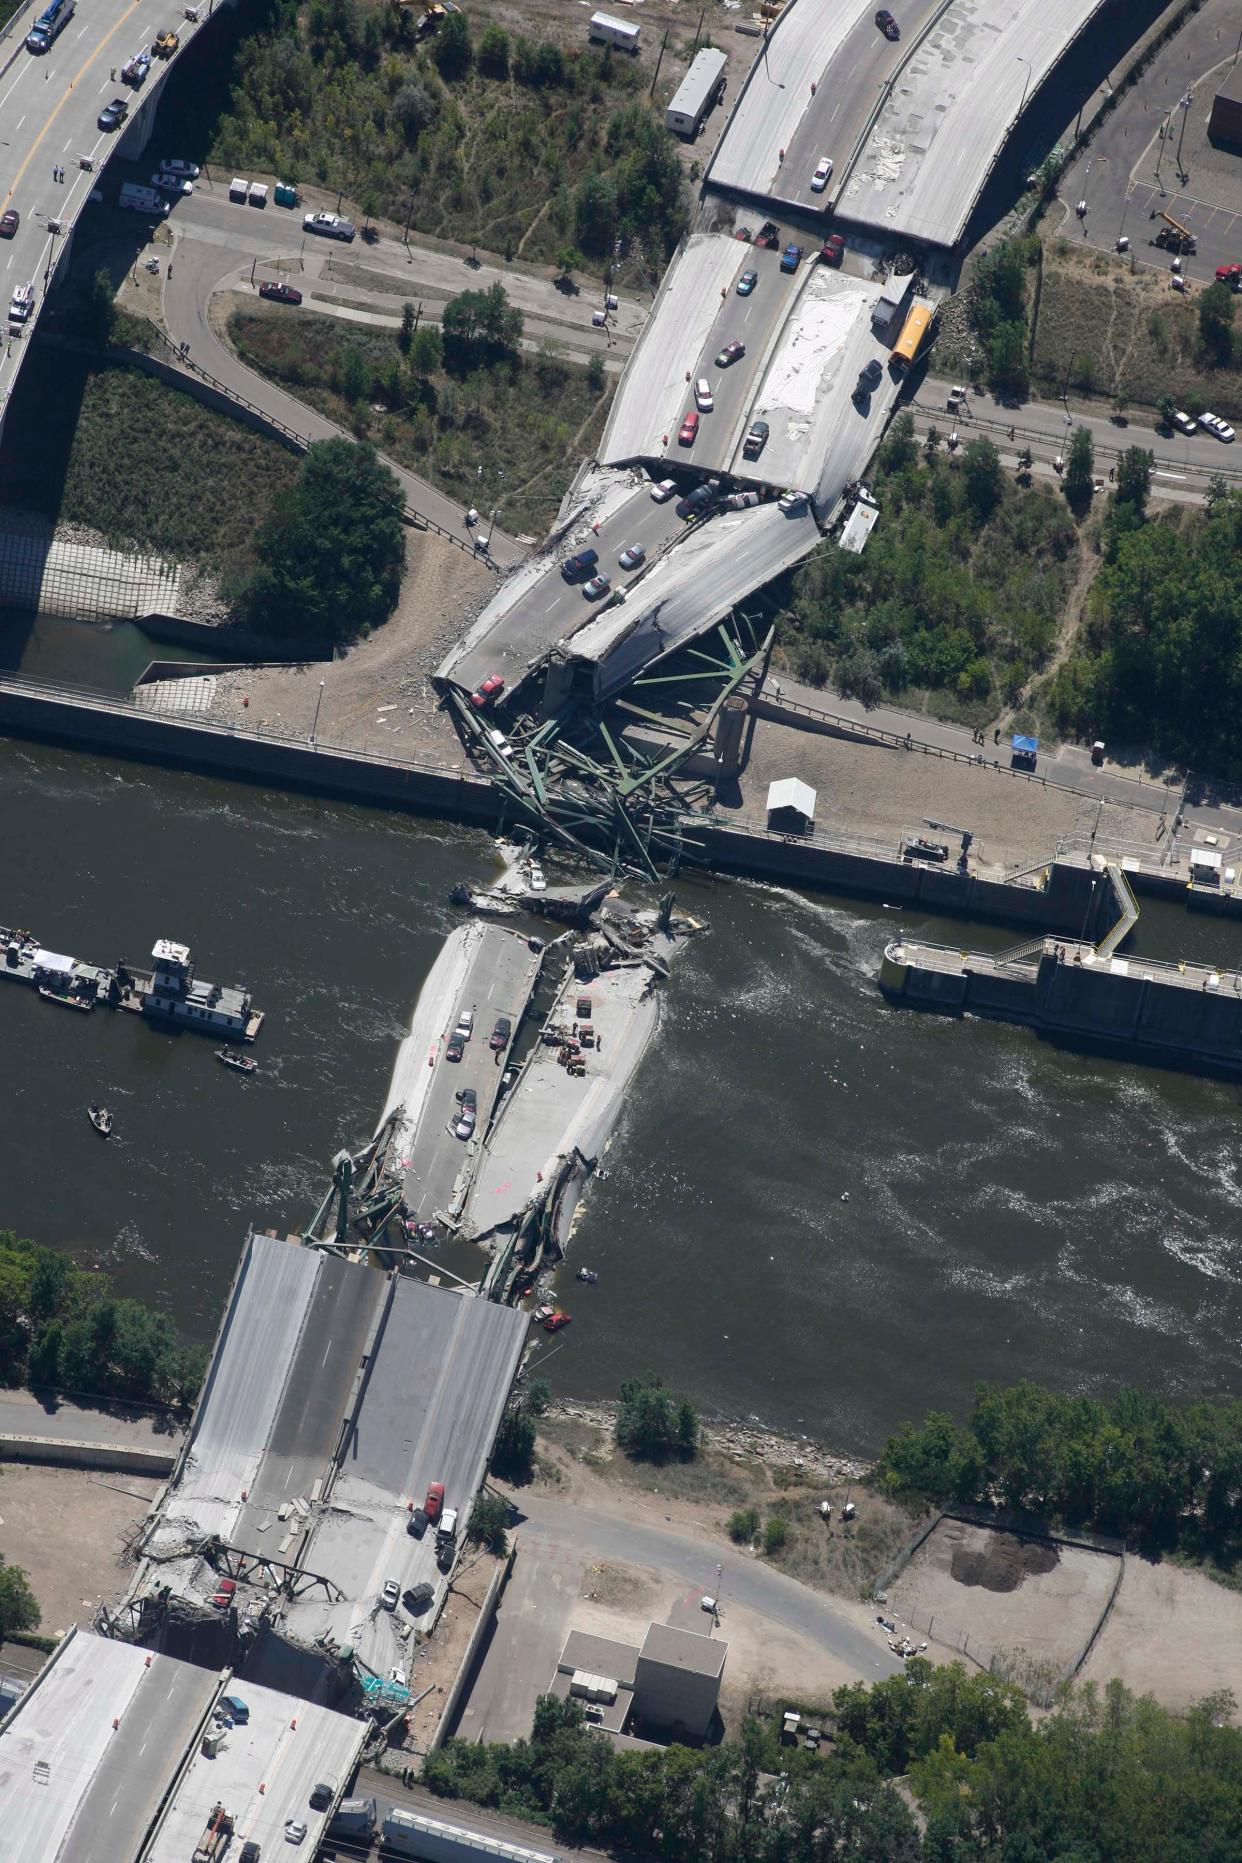 MINNEAPOLIS, Minn. - 8/2/2007 - Vehicles rest in this aerial photograph of a collapsed section of the I-35W bridge north of Minneapolis. The eight-lane bridge was undergoing repair work when it broke apart during rush hour 8/1 sending at least 50 vehicles into the Mississippi River.